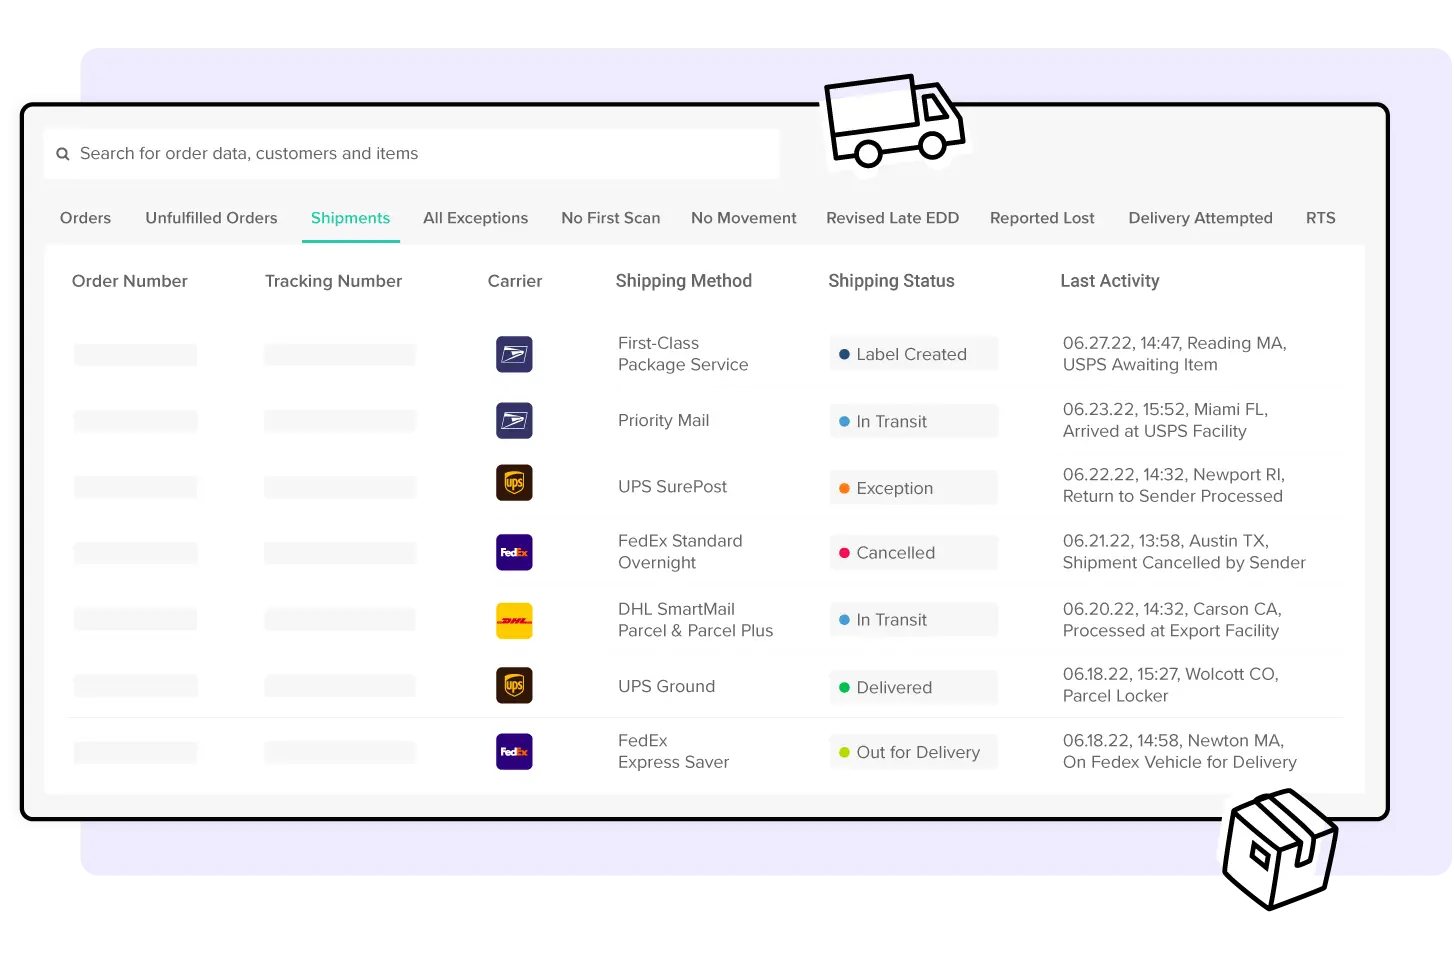 Realtime reporting and visibility of all your orders and shipments